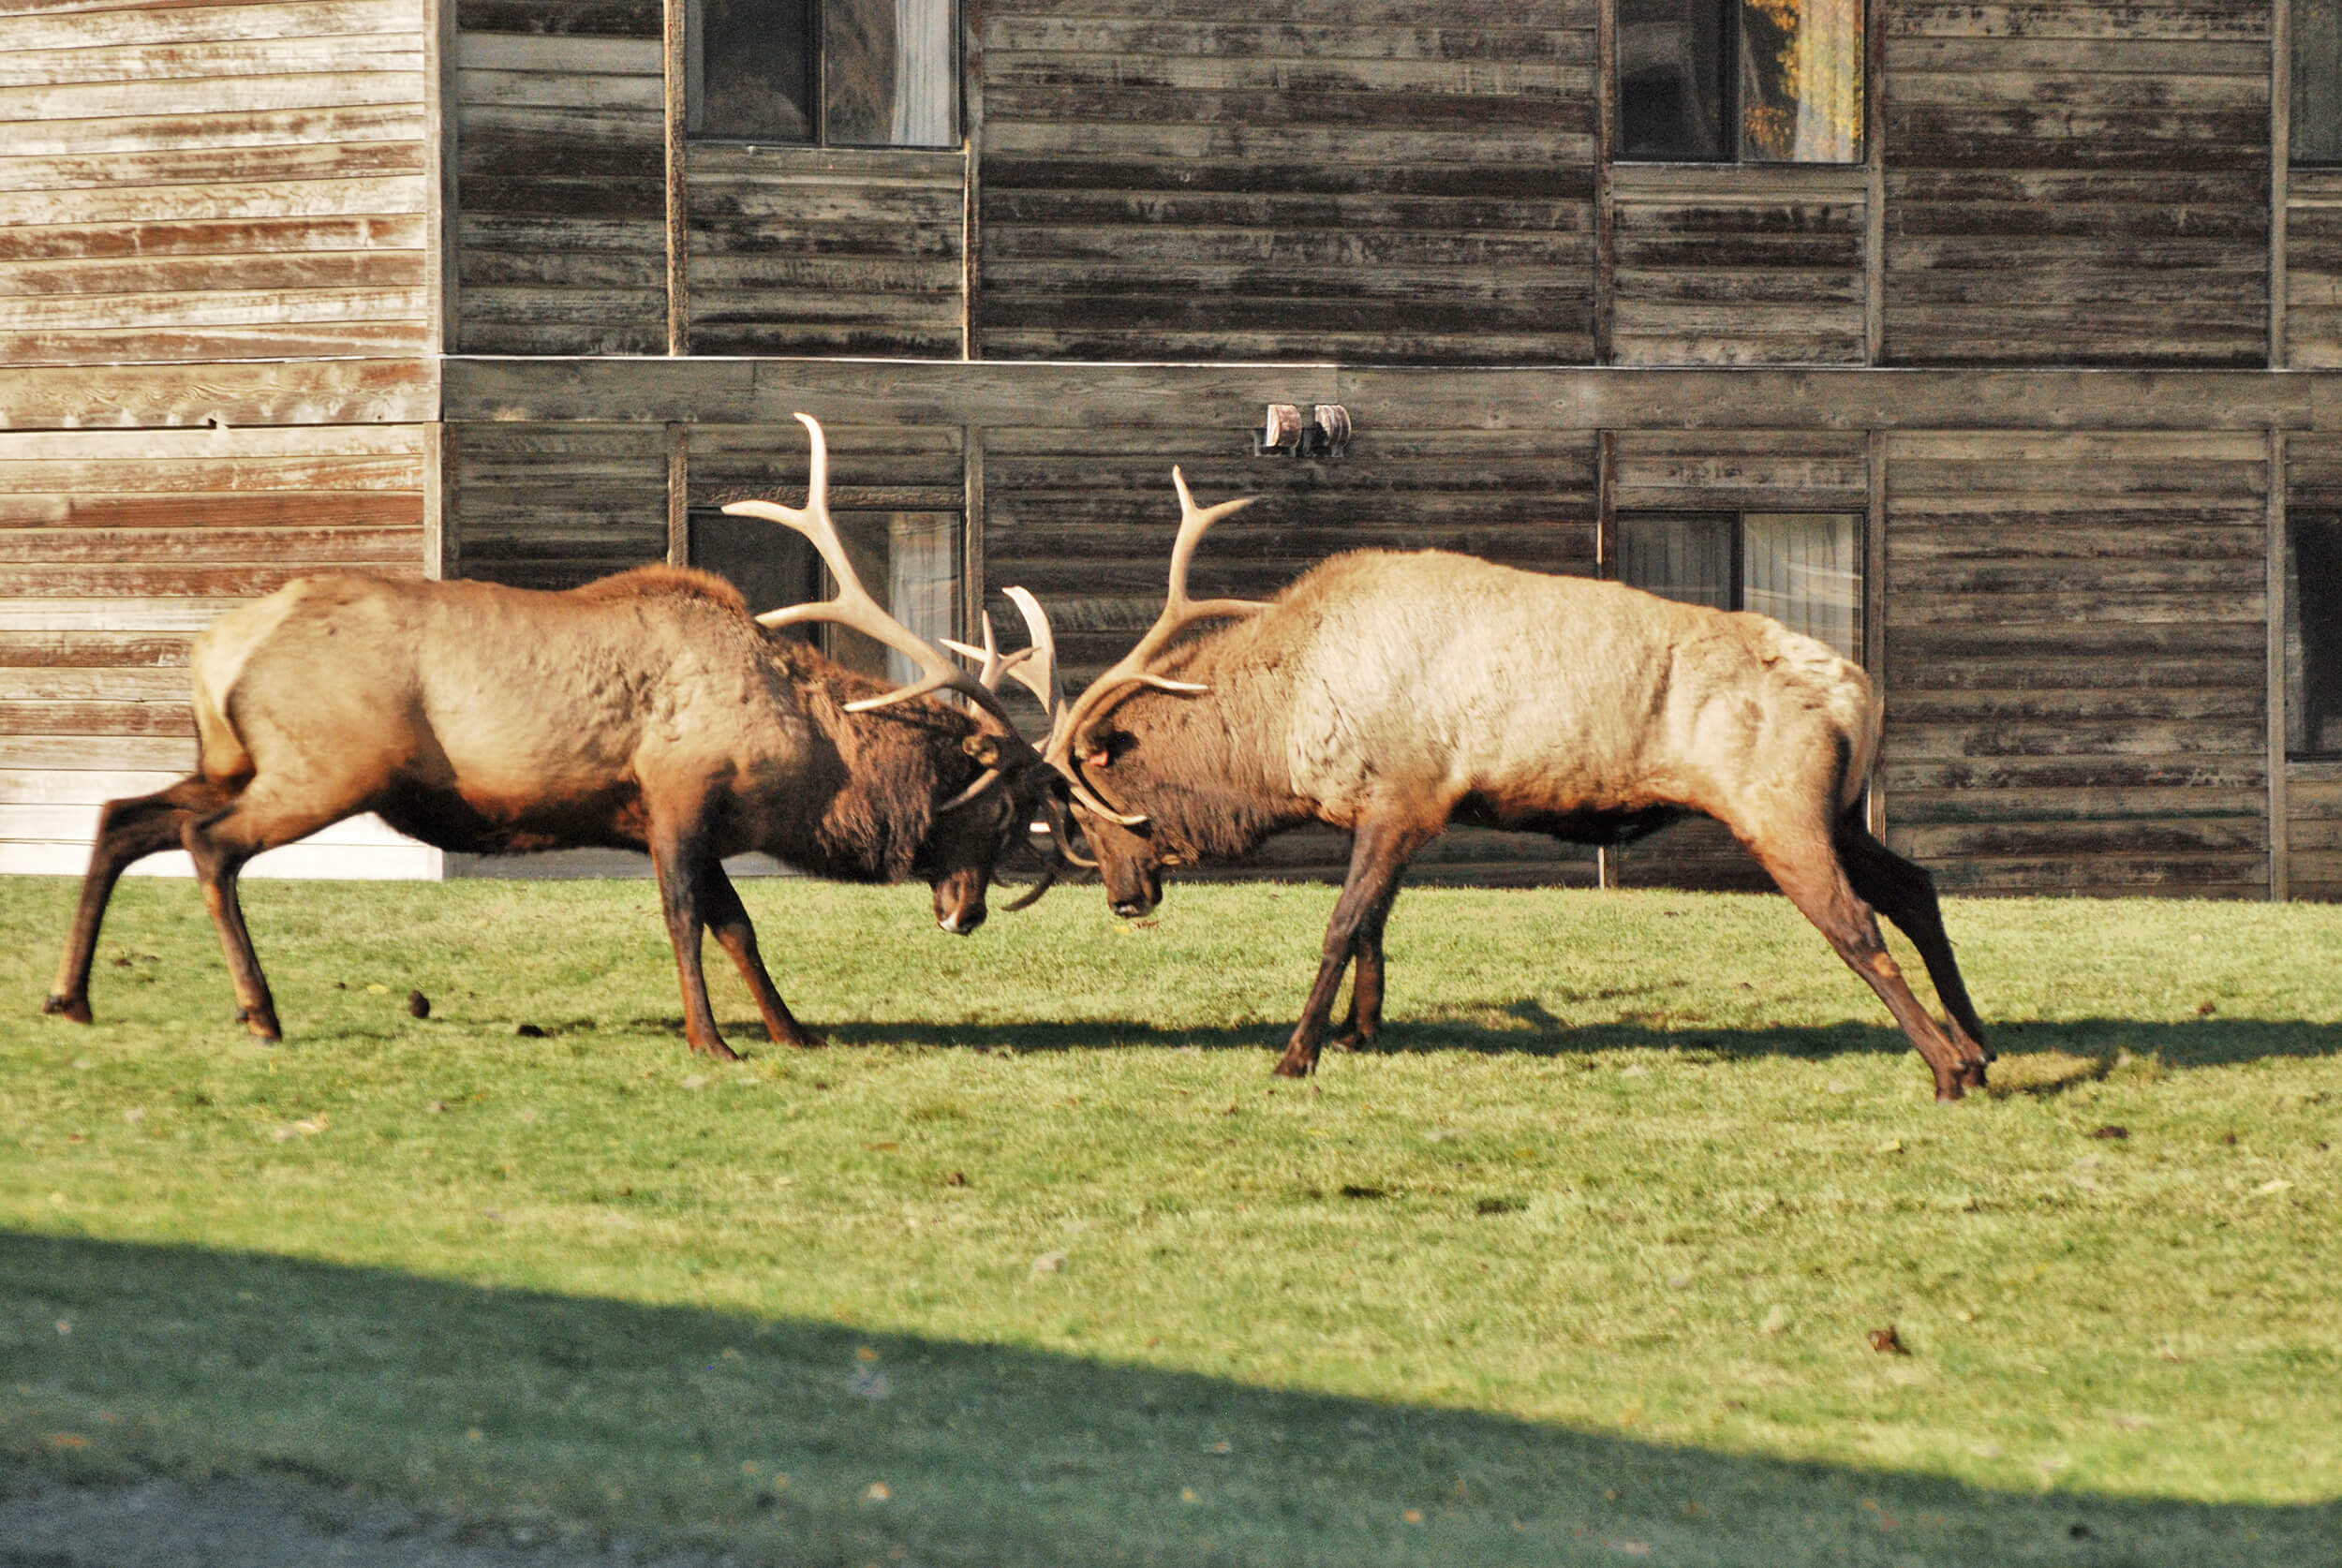 Two elk butting heads